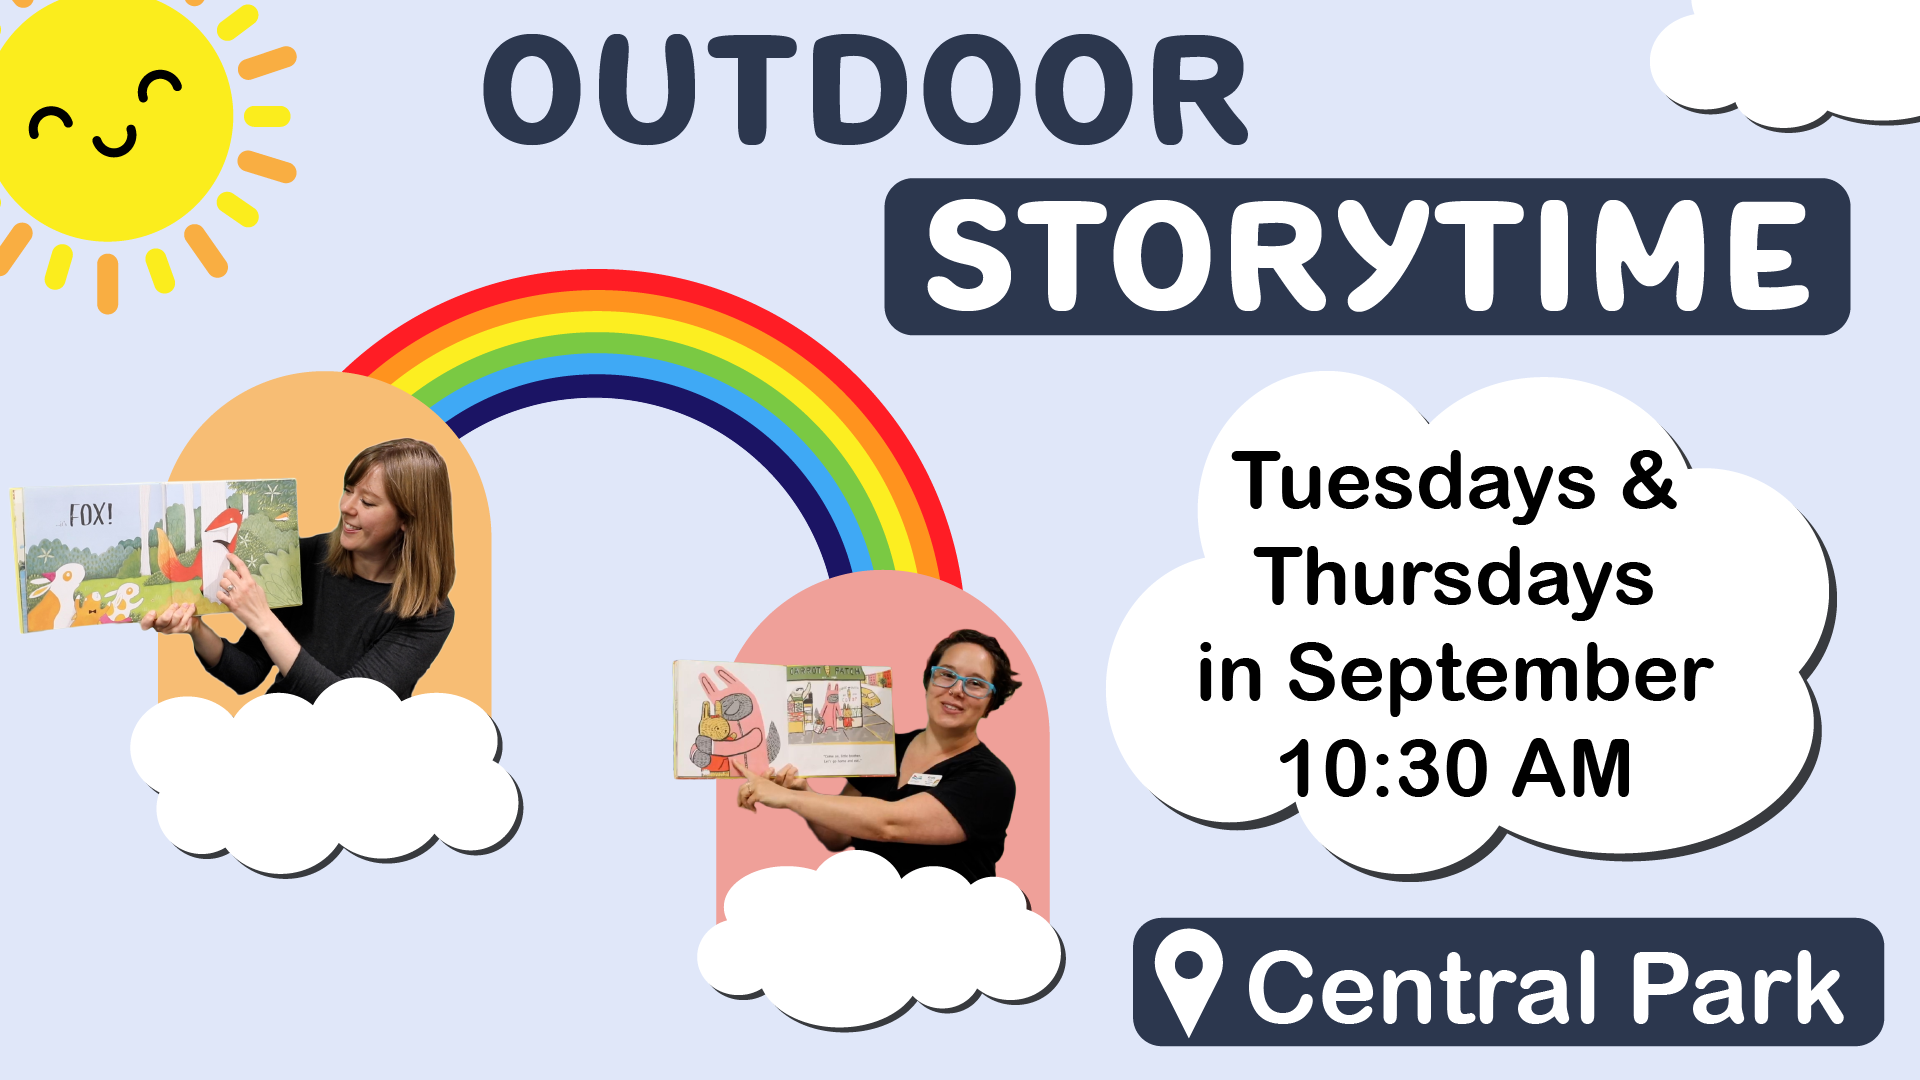 Outdoor storytime, Tuesdays & Thursdays in September at 10:30 AM, at Central Park